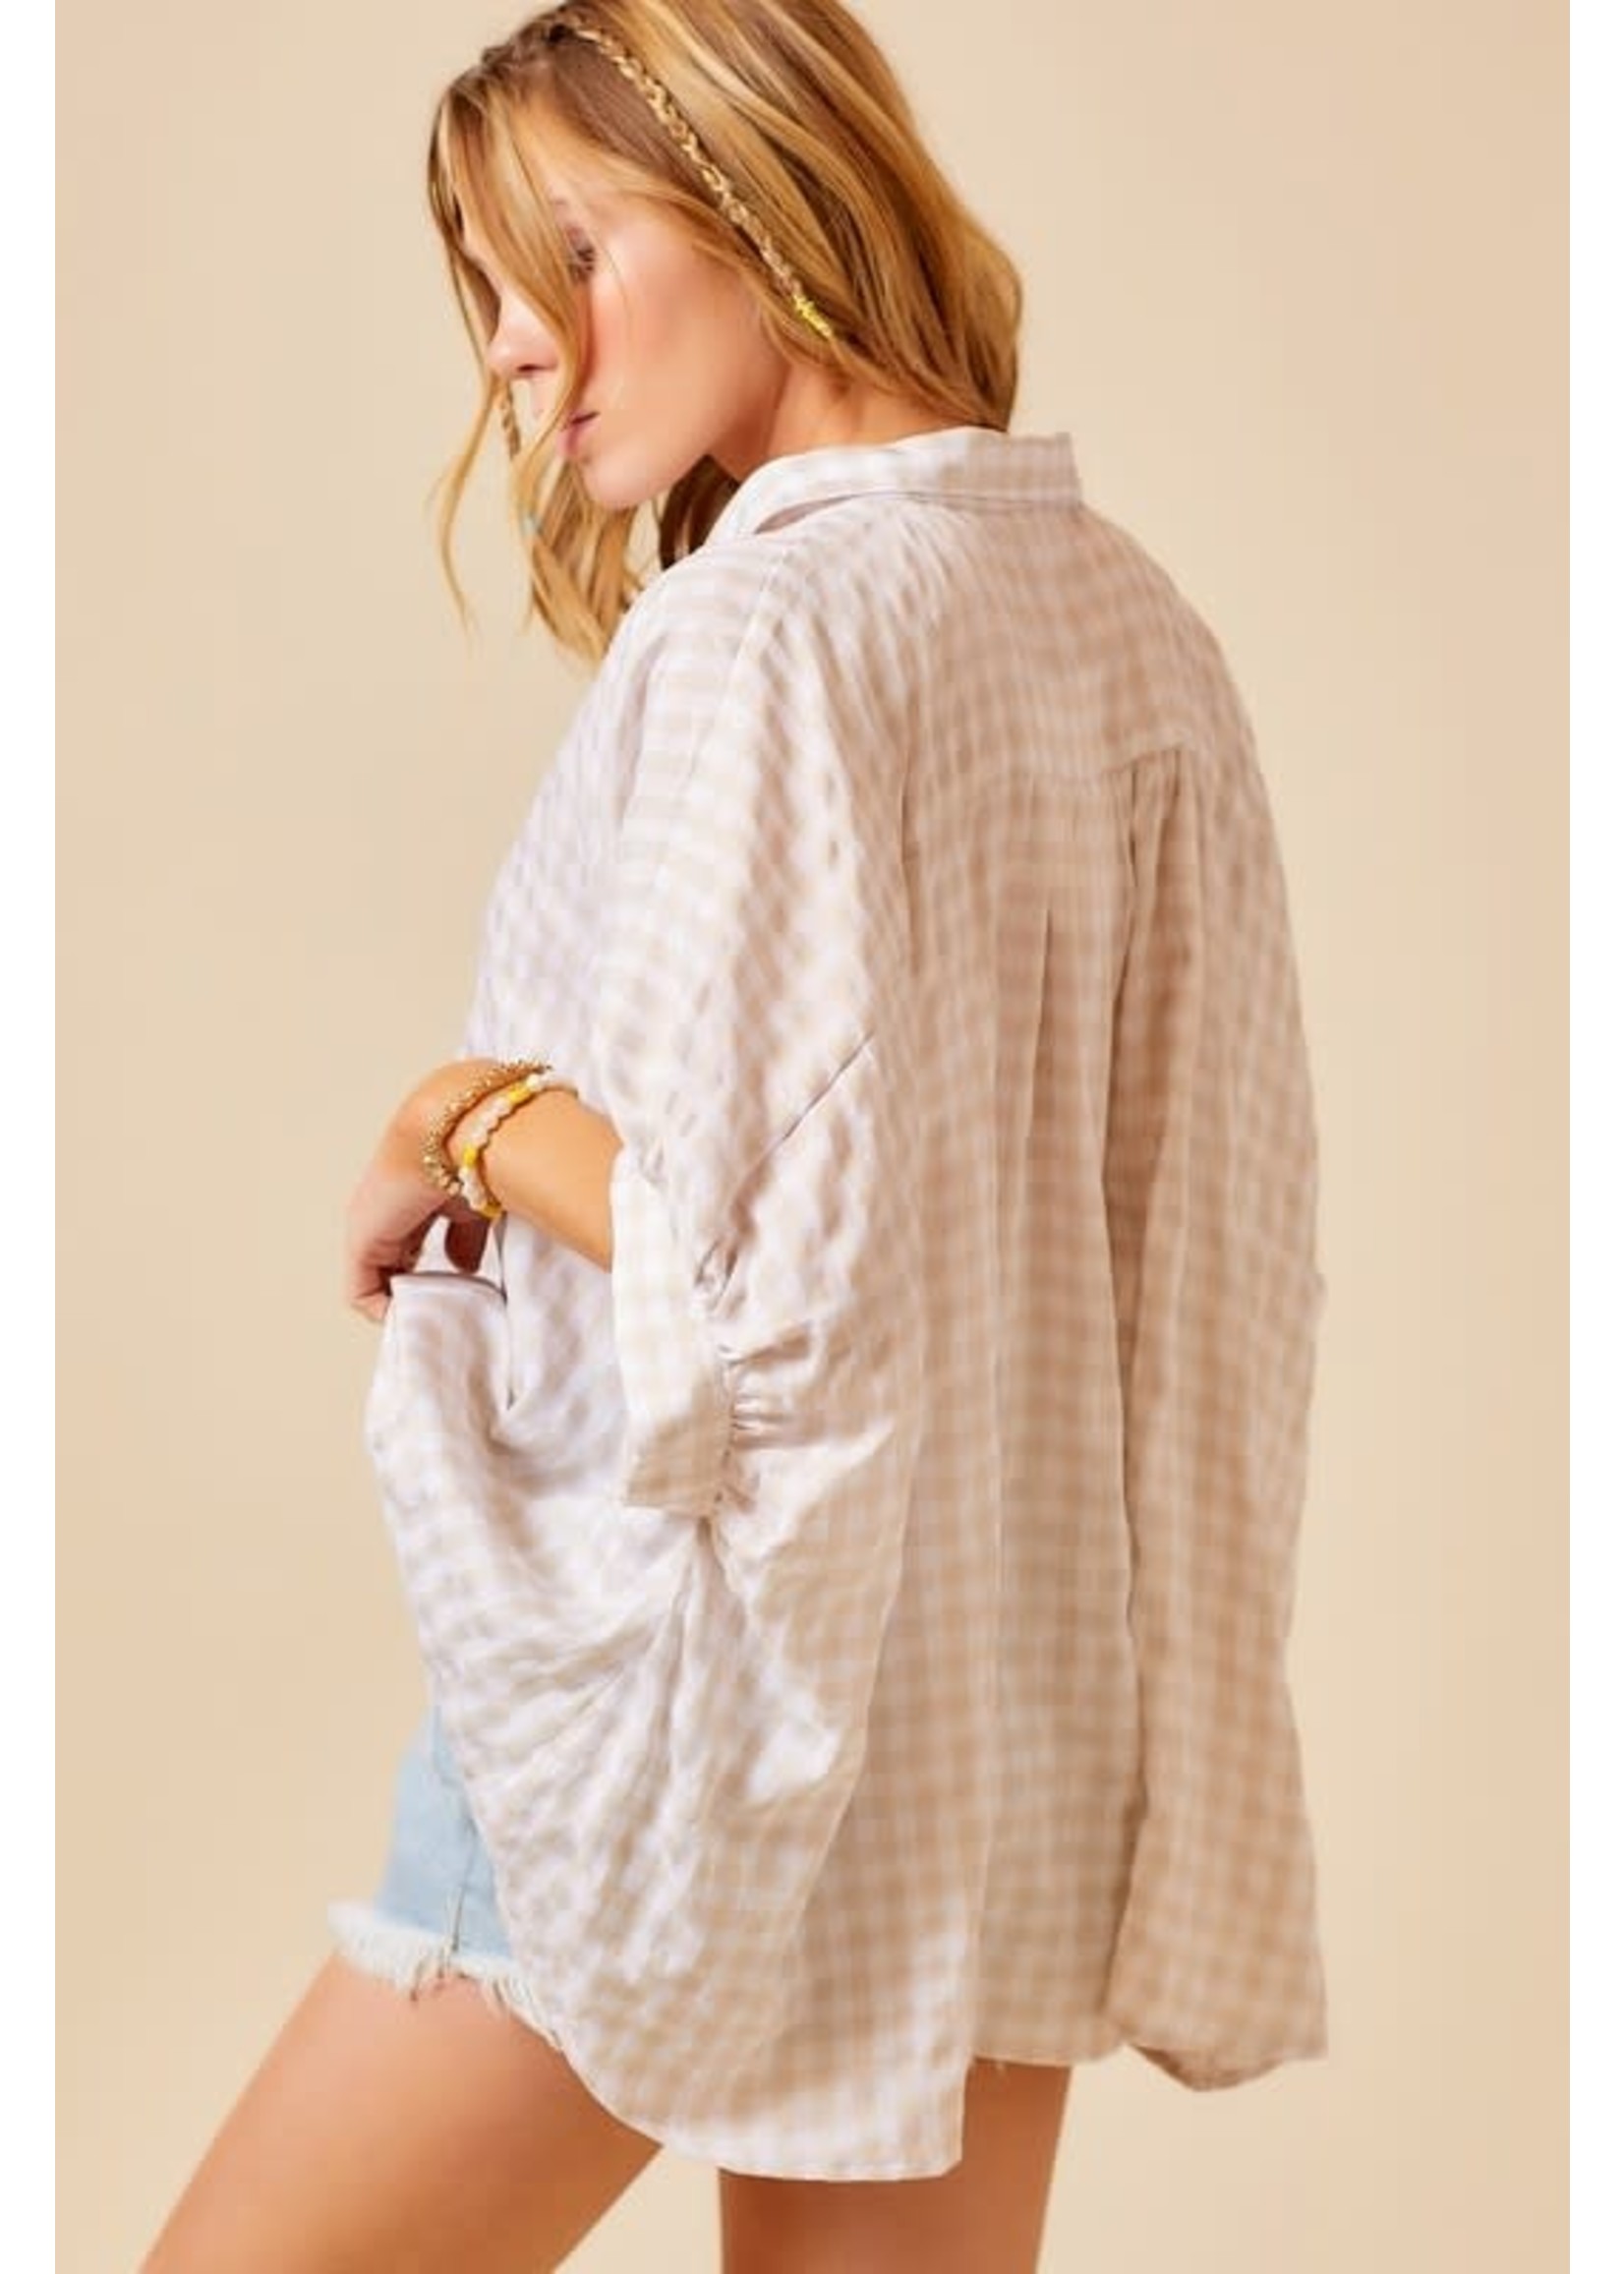 Day + Moon Flowy Oversized Check Shirt - A2028